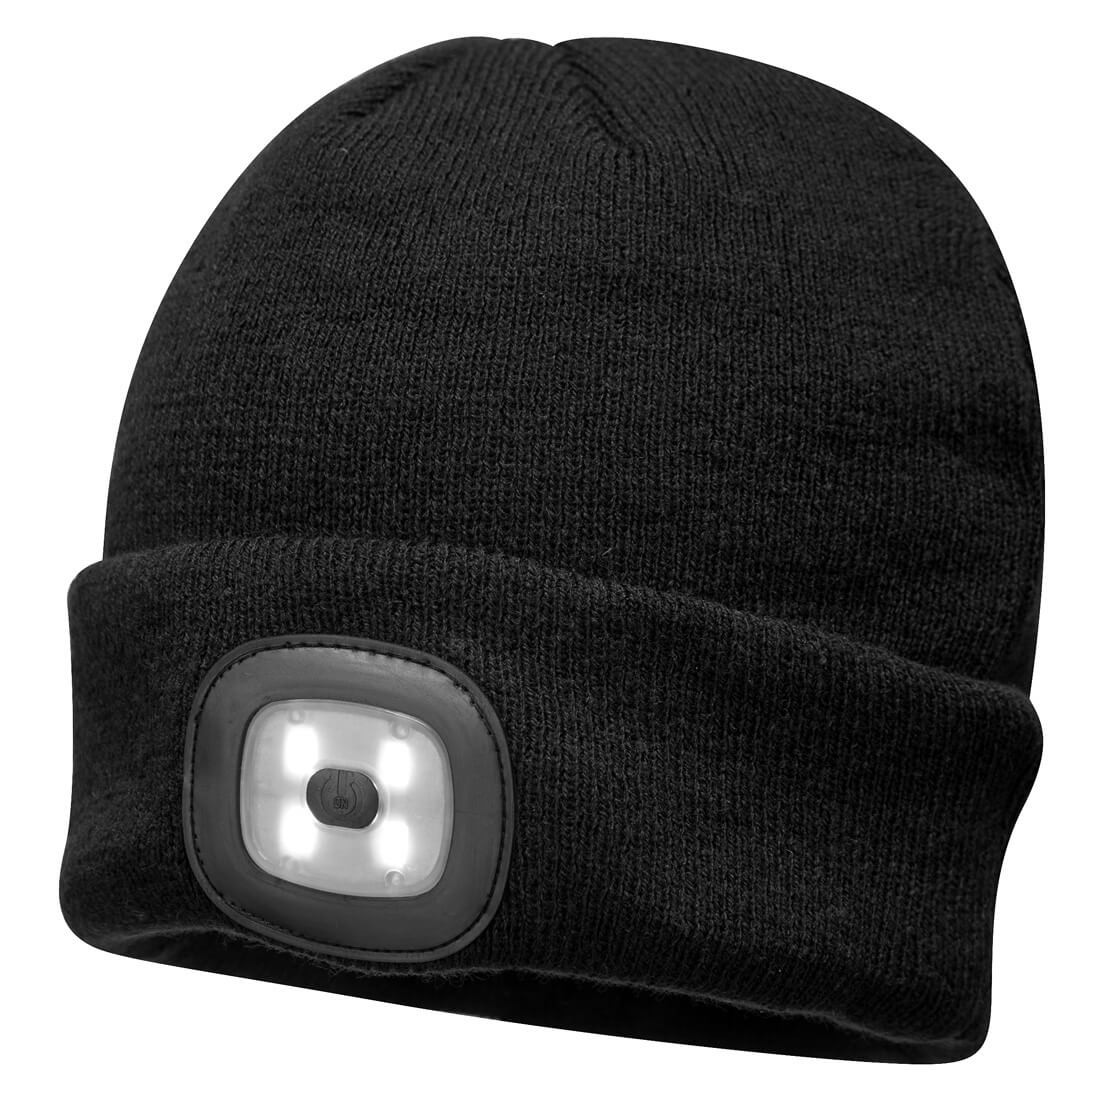 Beanie LED Head Light USB Rechargeable - Safetywear